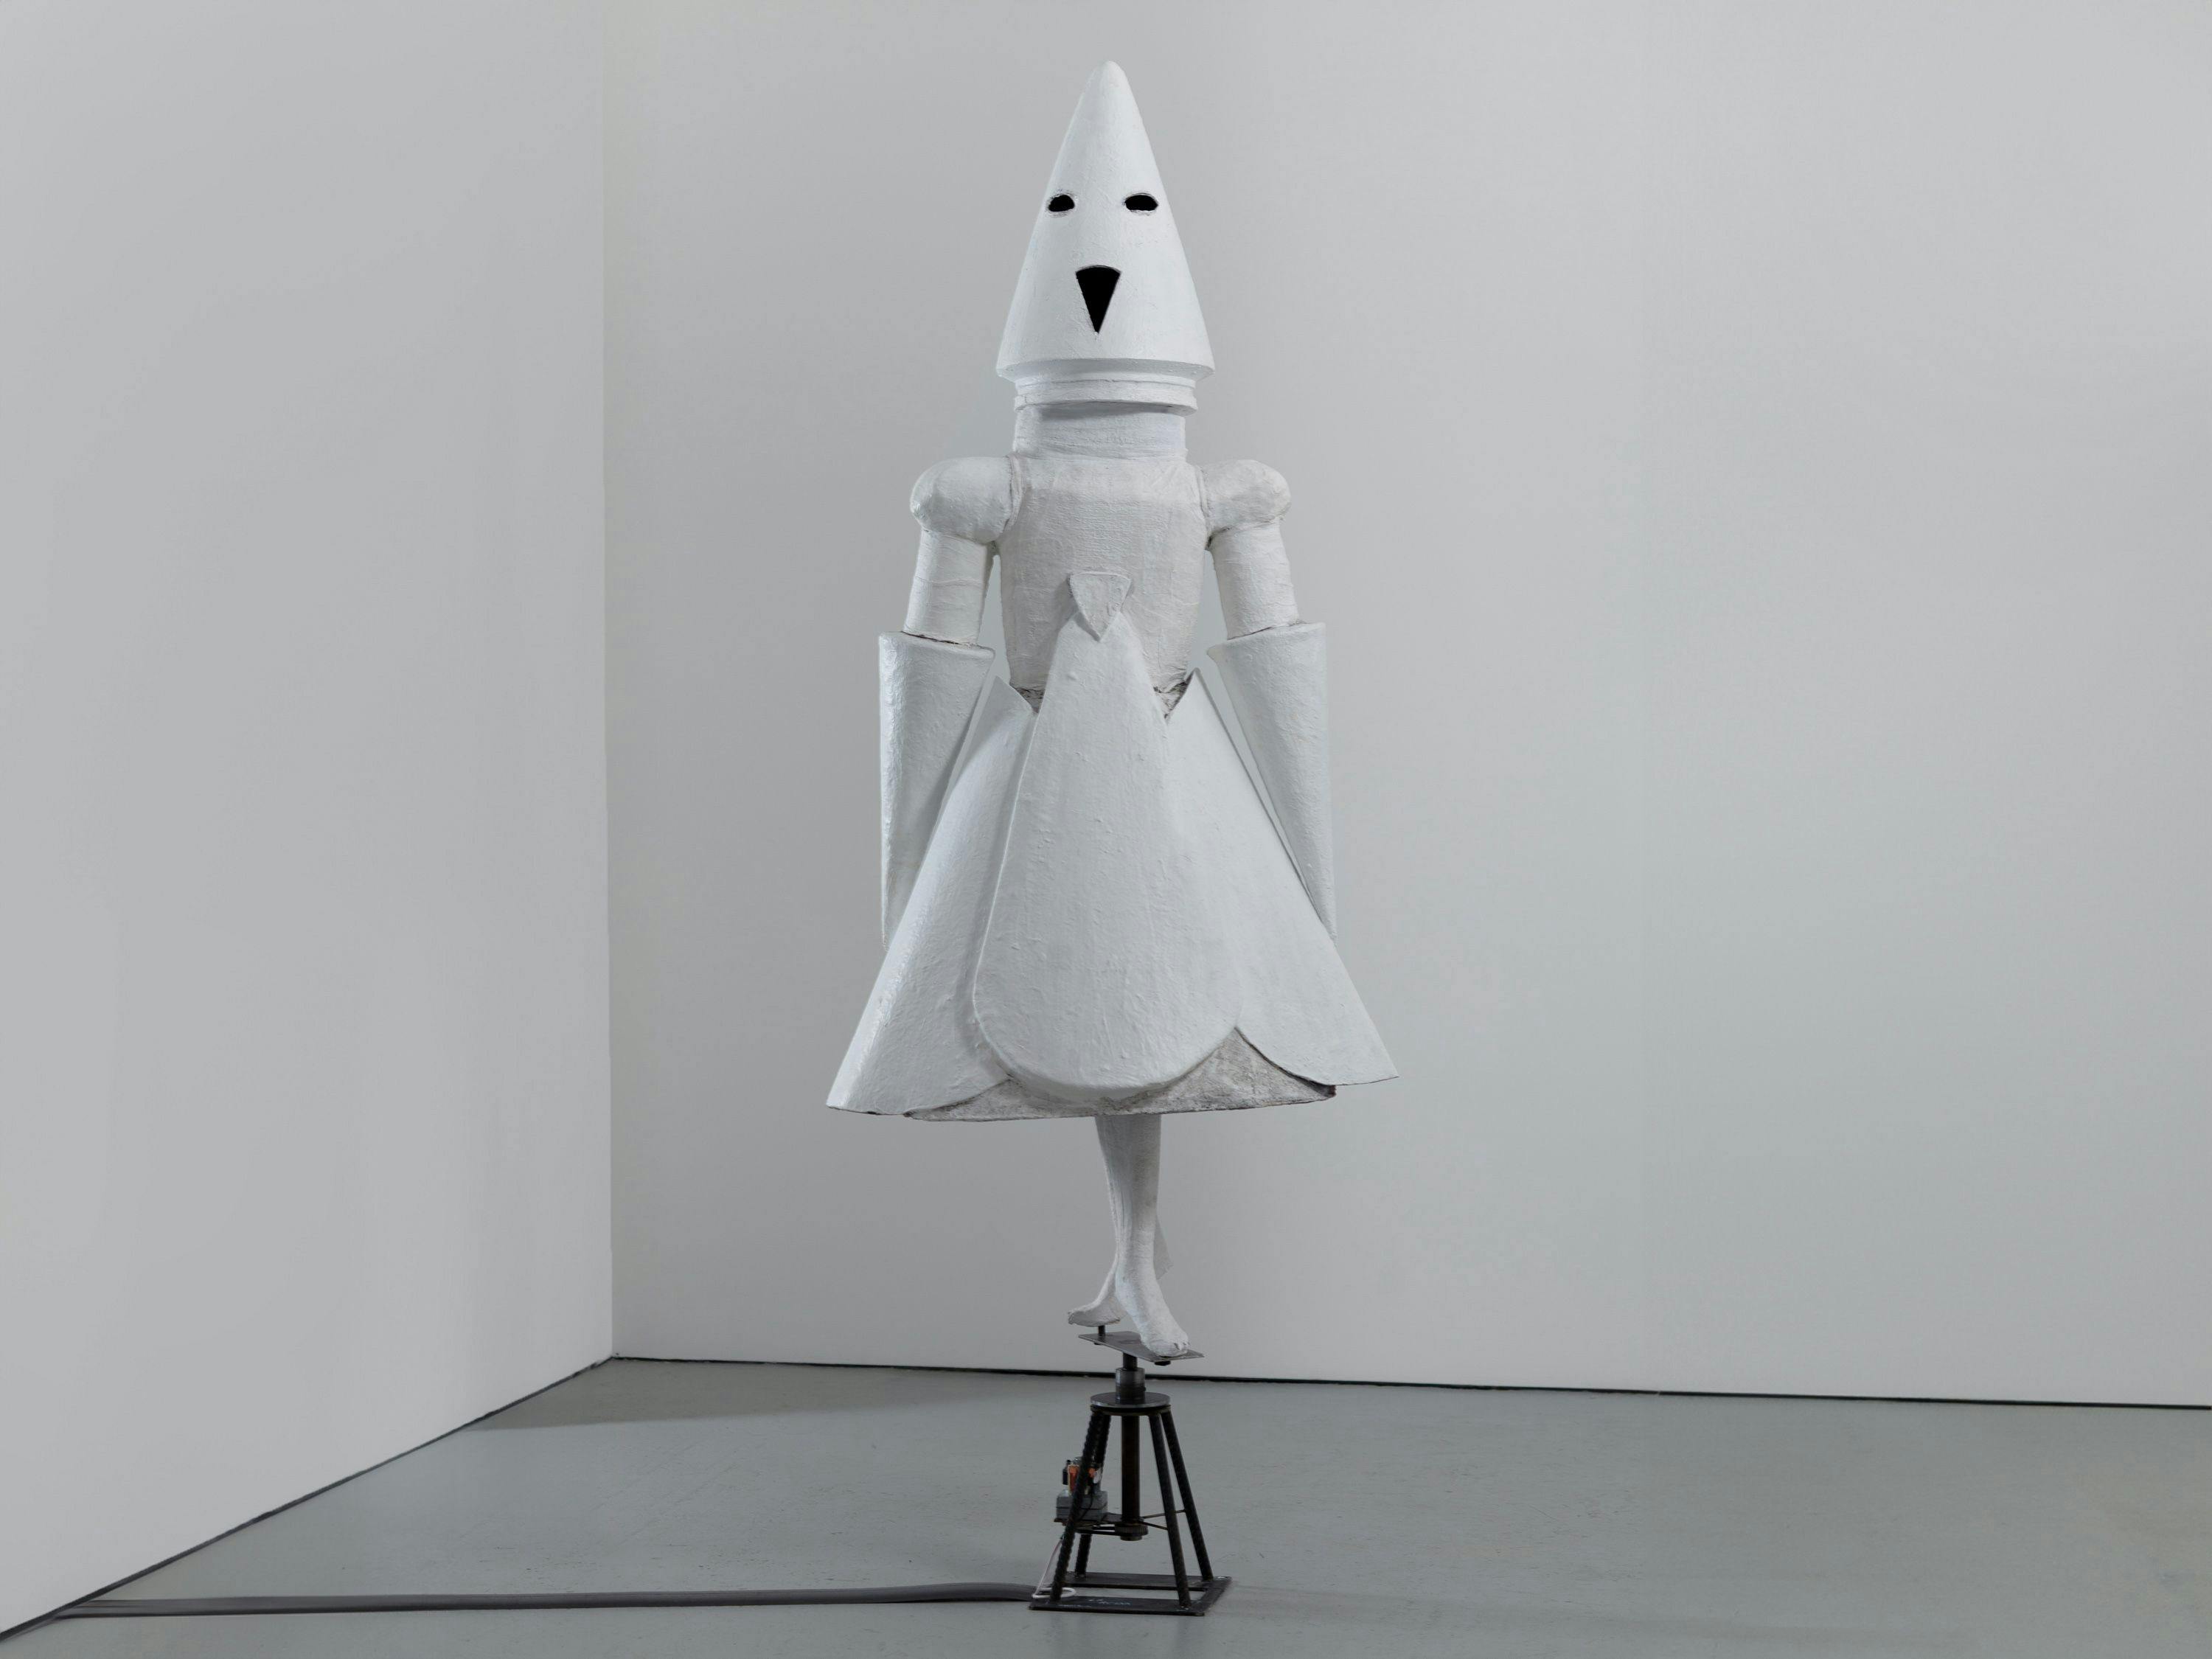 A sculpture by Marcel Dzama, titled The queen [La reina], dated 2011.